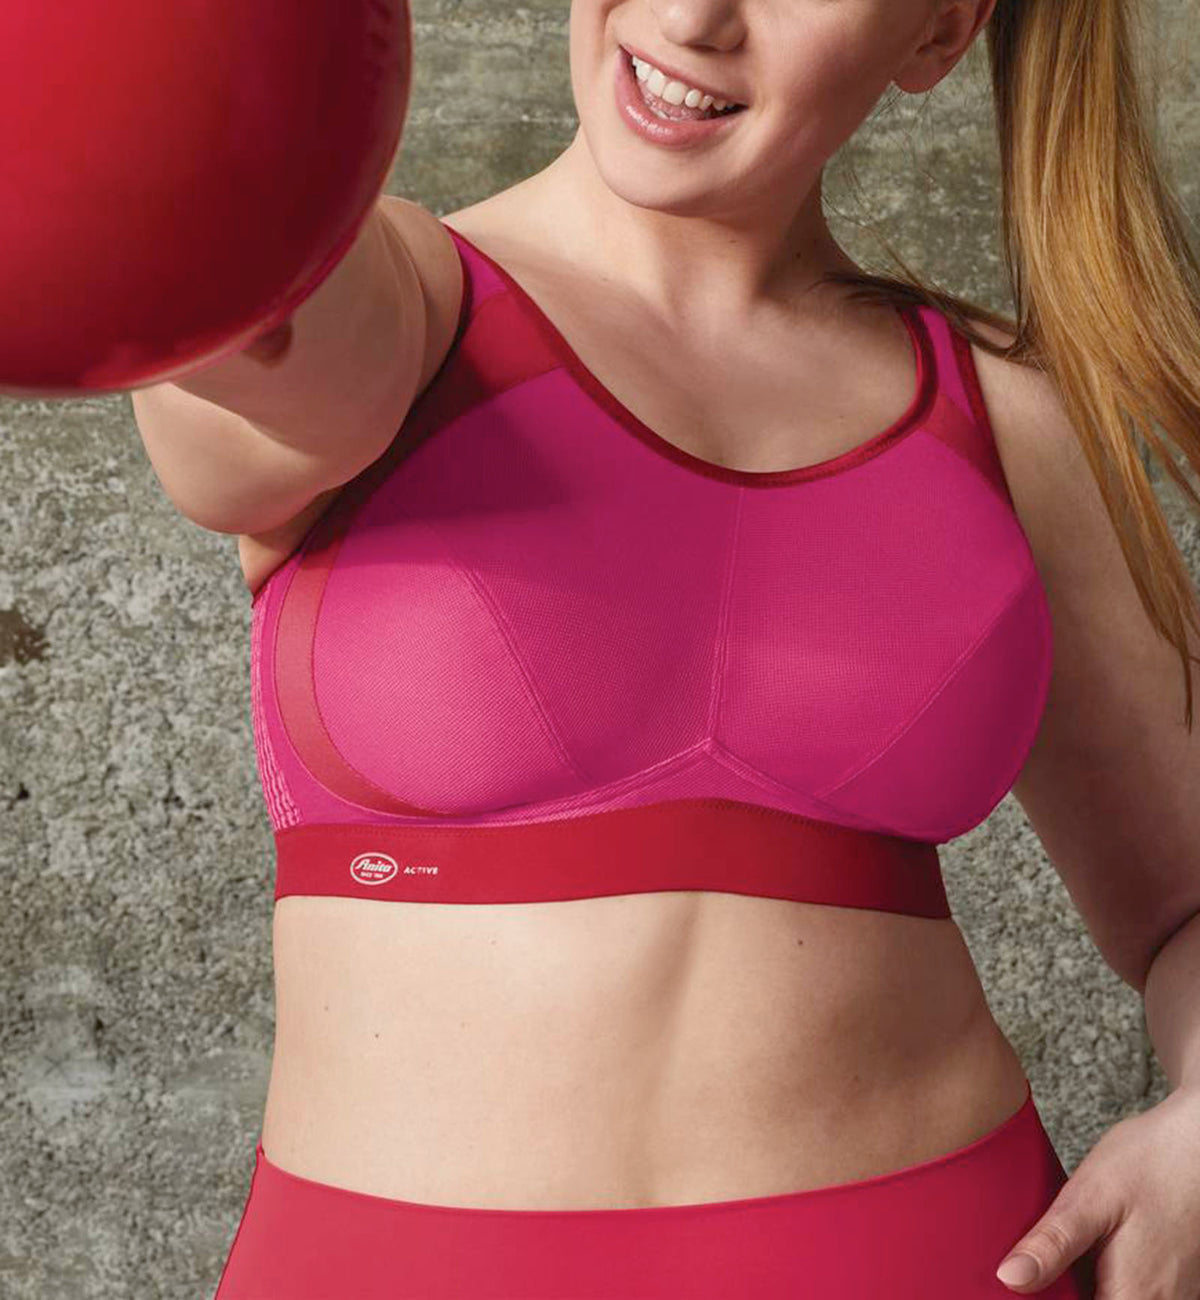 Anita Extreme Control Wireless Sports Bra (5527),32D,Candy Red - Candy Red,32D